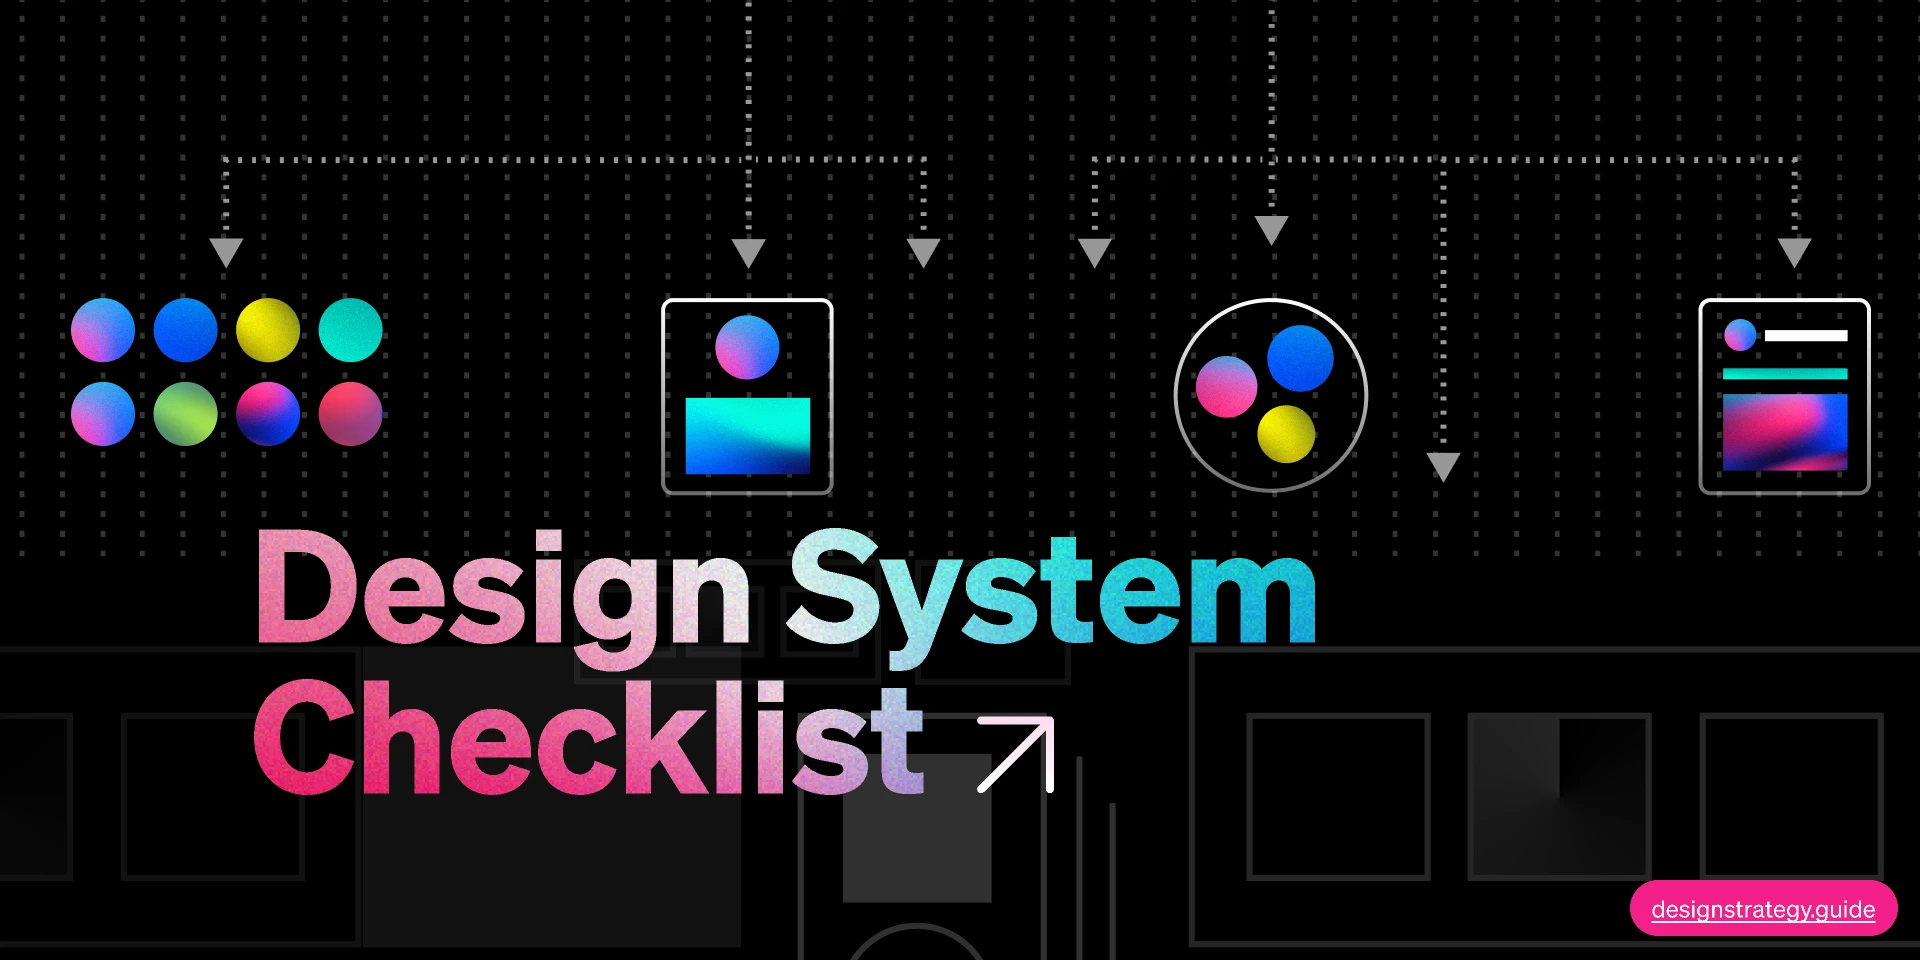 Design Systems Checklist for Figma and Adobe XD